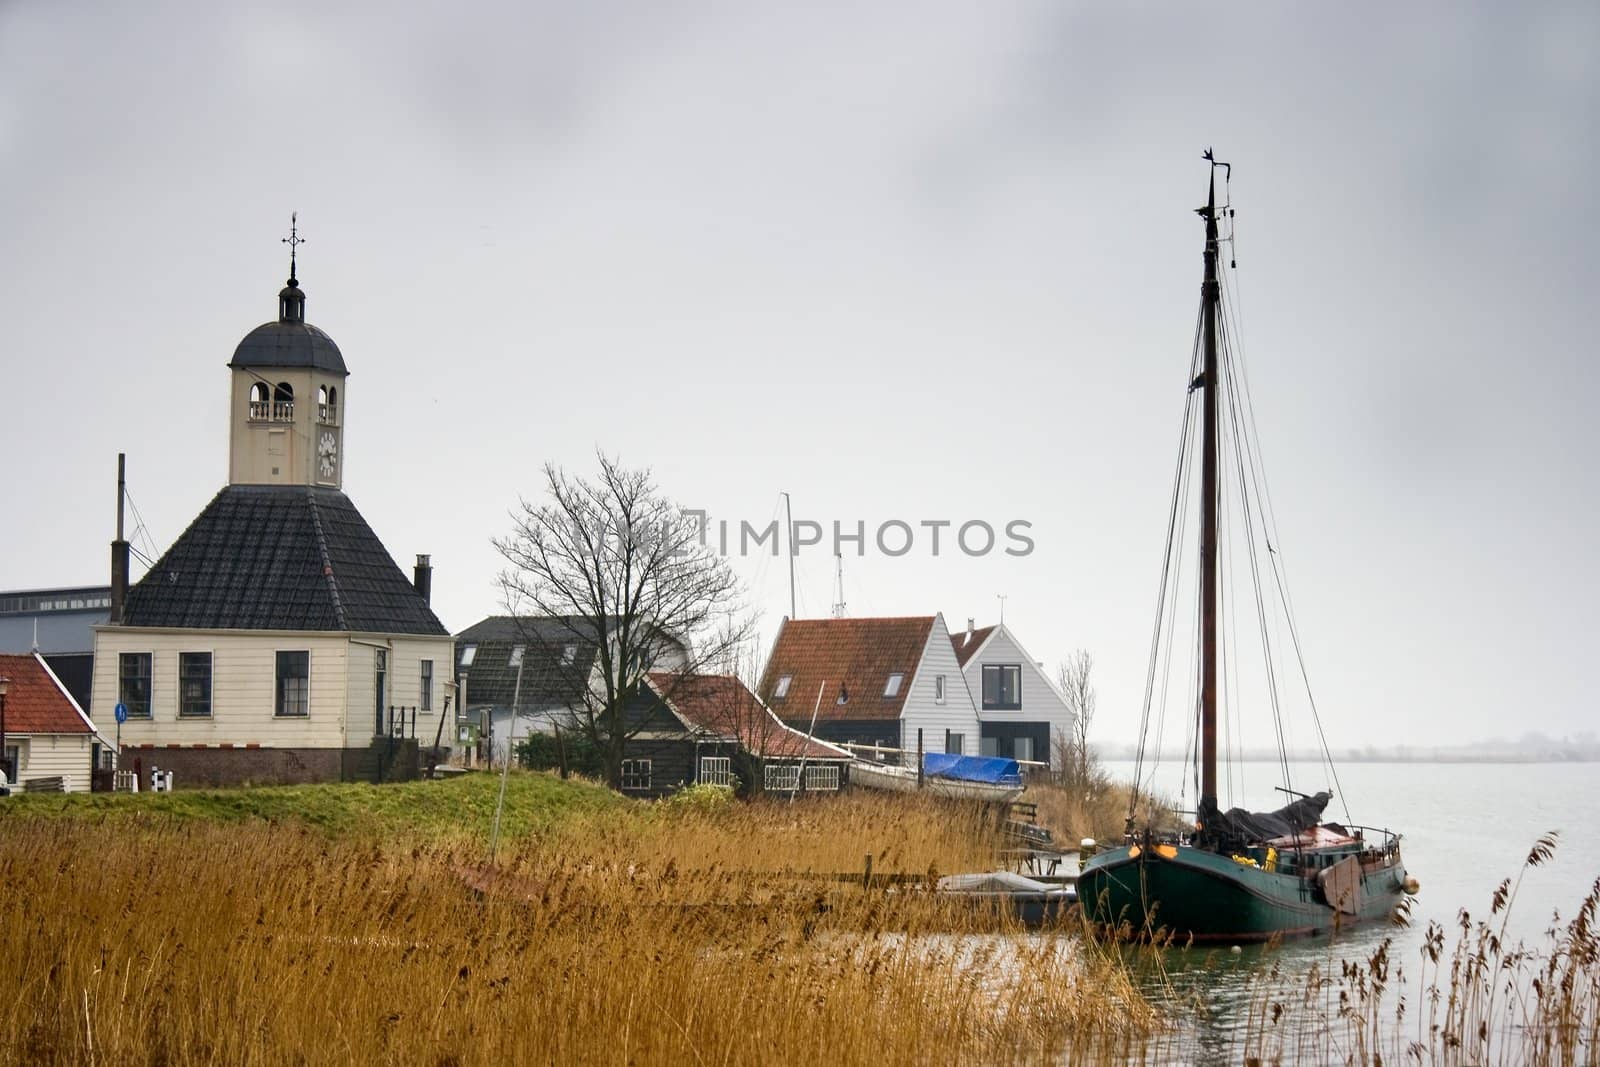 Fishing village with houses, church and boat at the lake on dark, cloudy and rainy day in winter